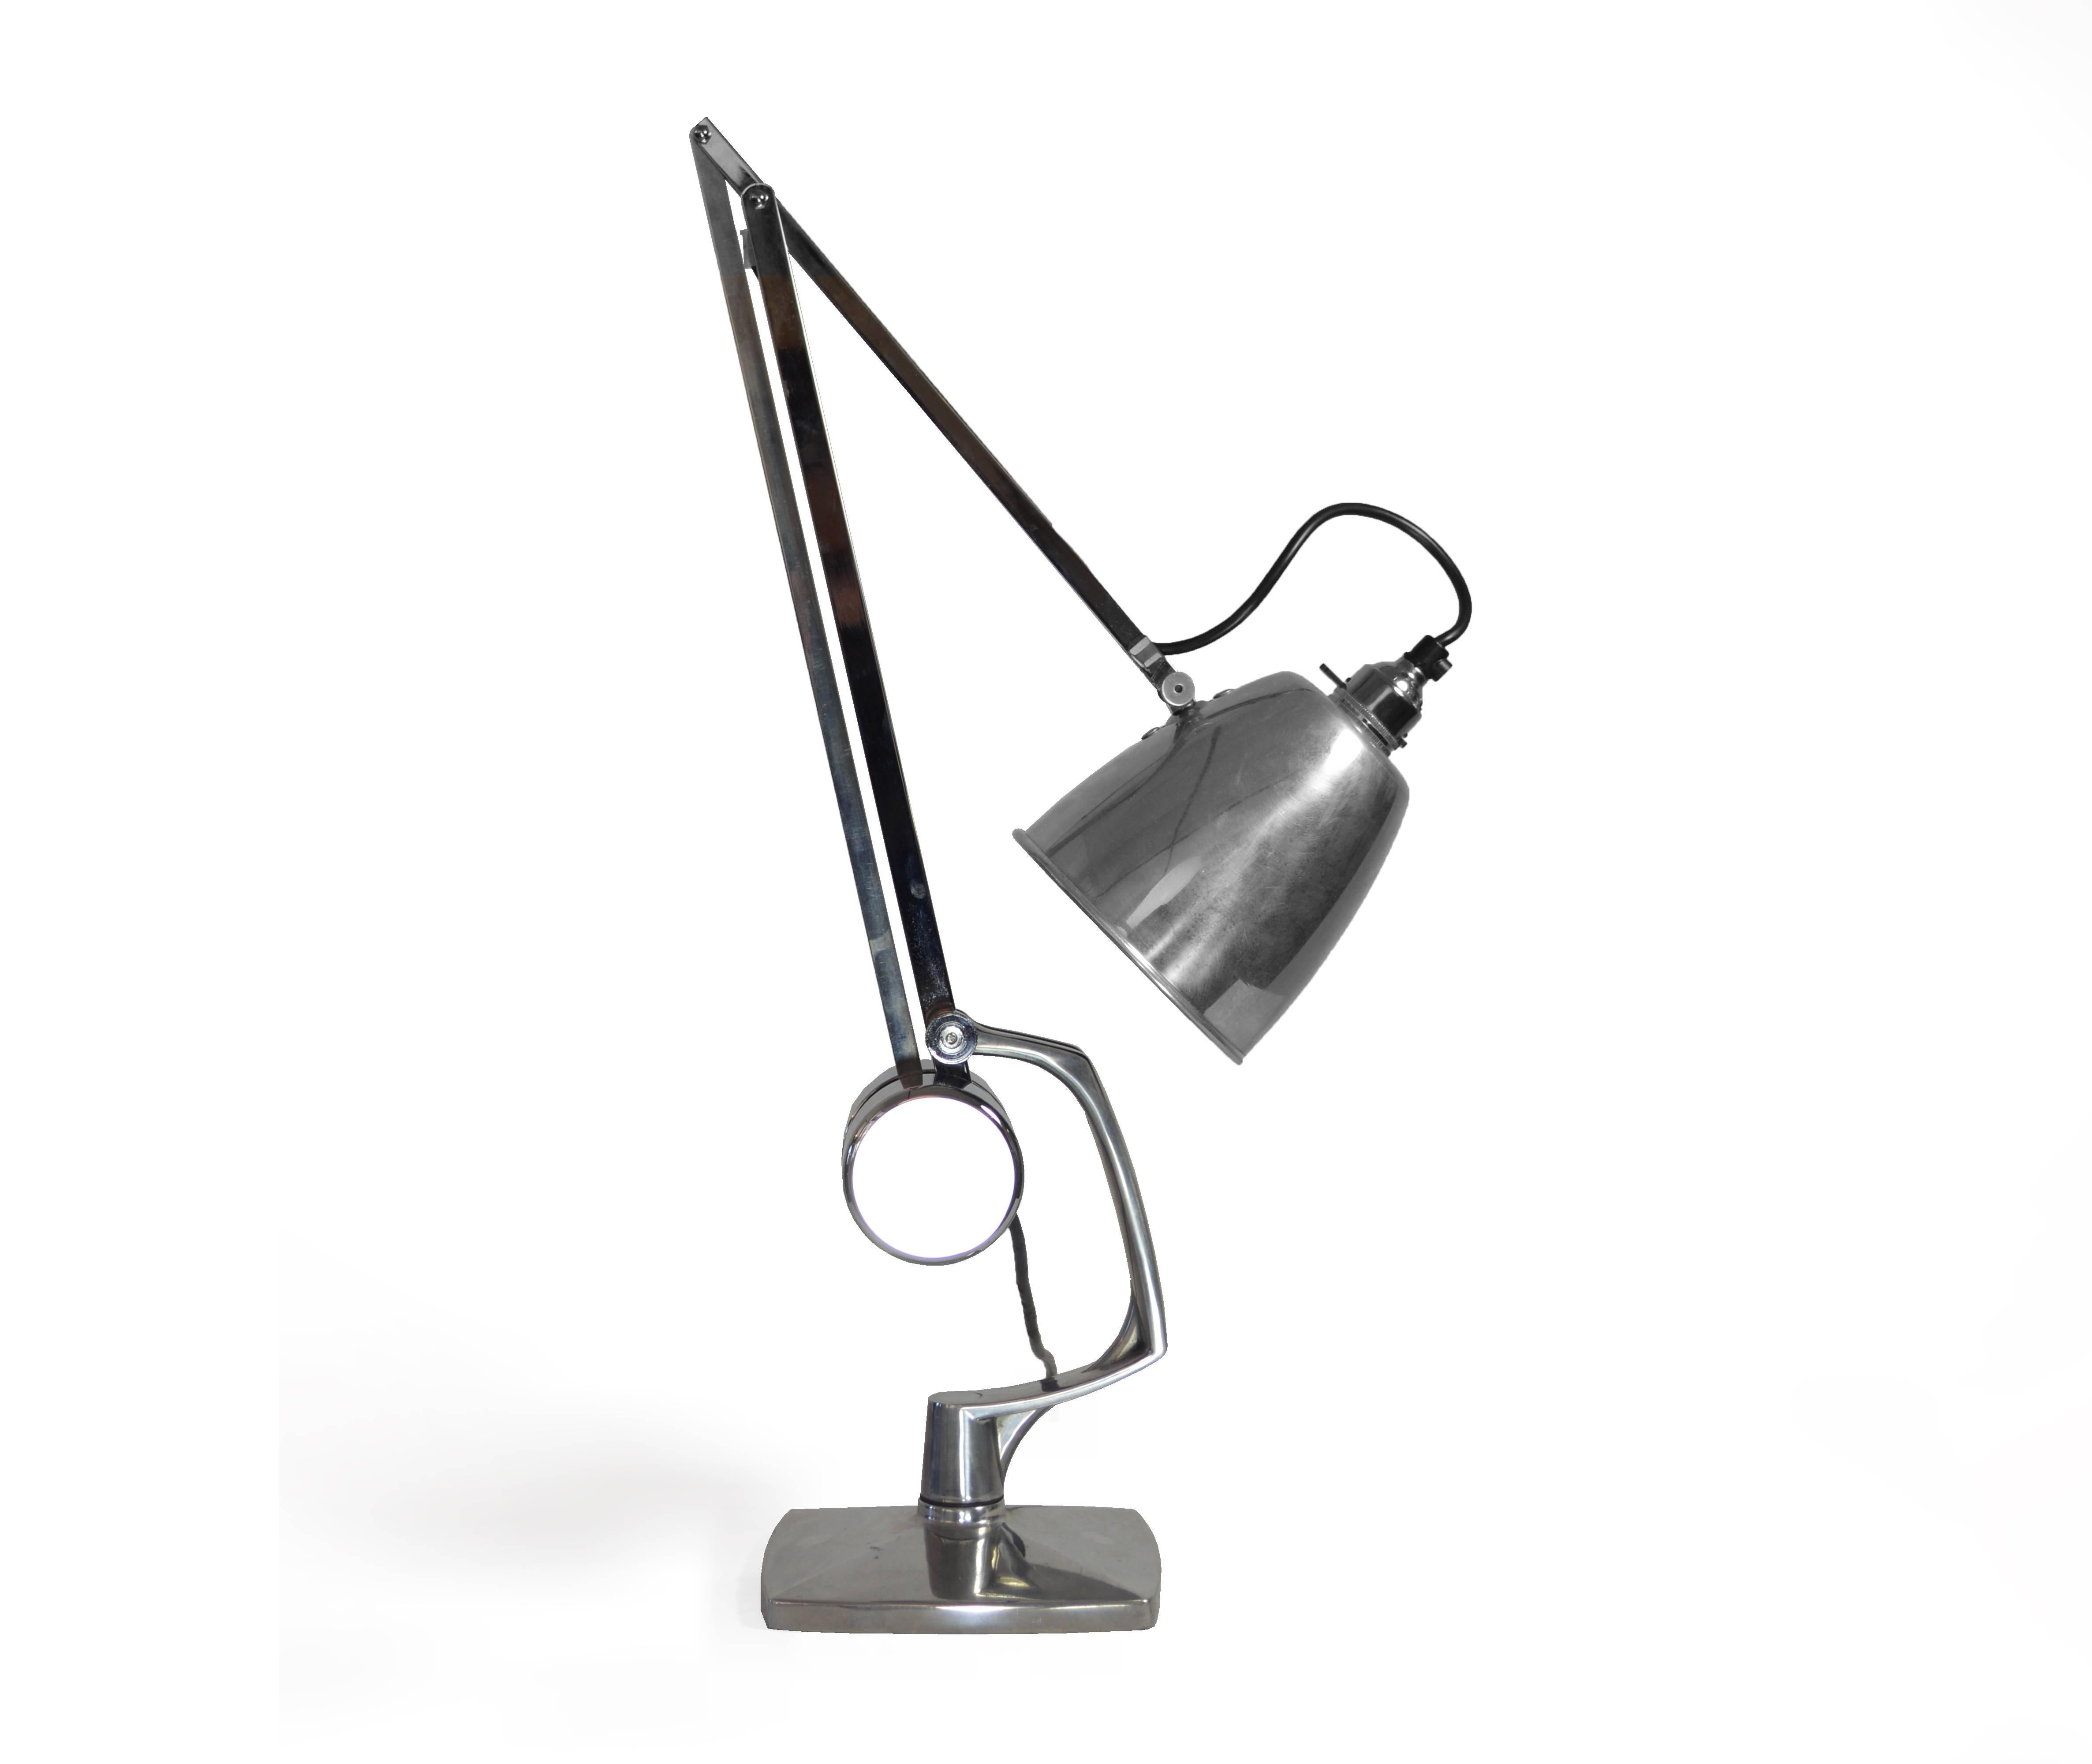 Adjustable metal table lamp by Hadrill & Horstman. Not wired for the US, compatible with British electrical sockets. Works with 40W bulbs. Makers mark visible.

Offered by Neal Beckstedt